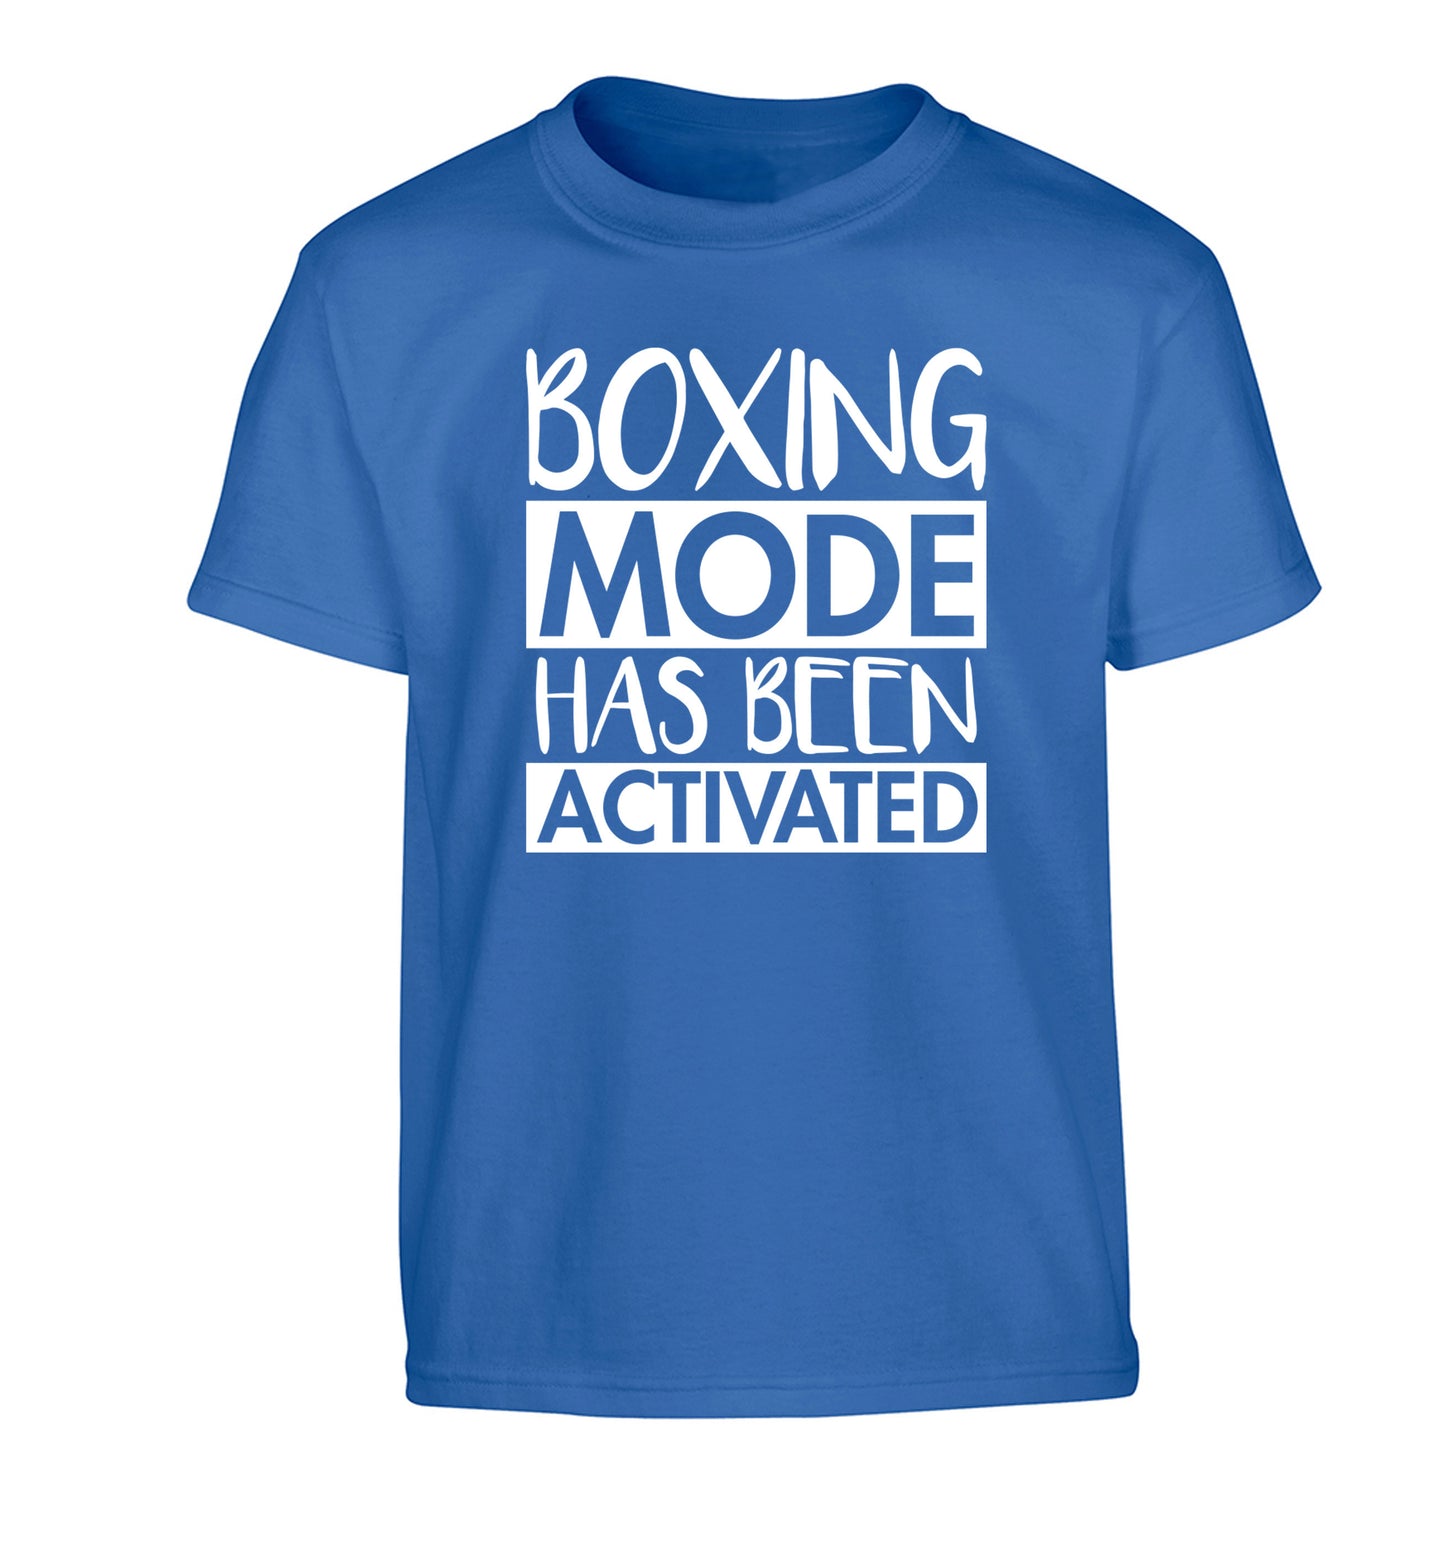 Boxing mode activated Children's blue Tshirt 12-14 Years